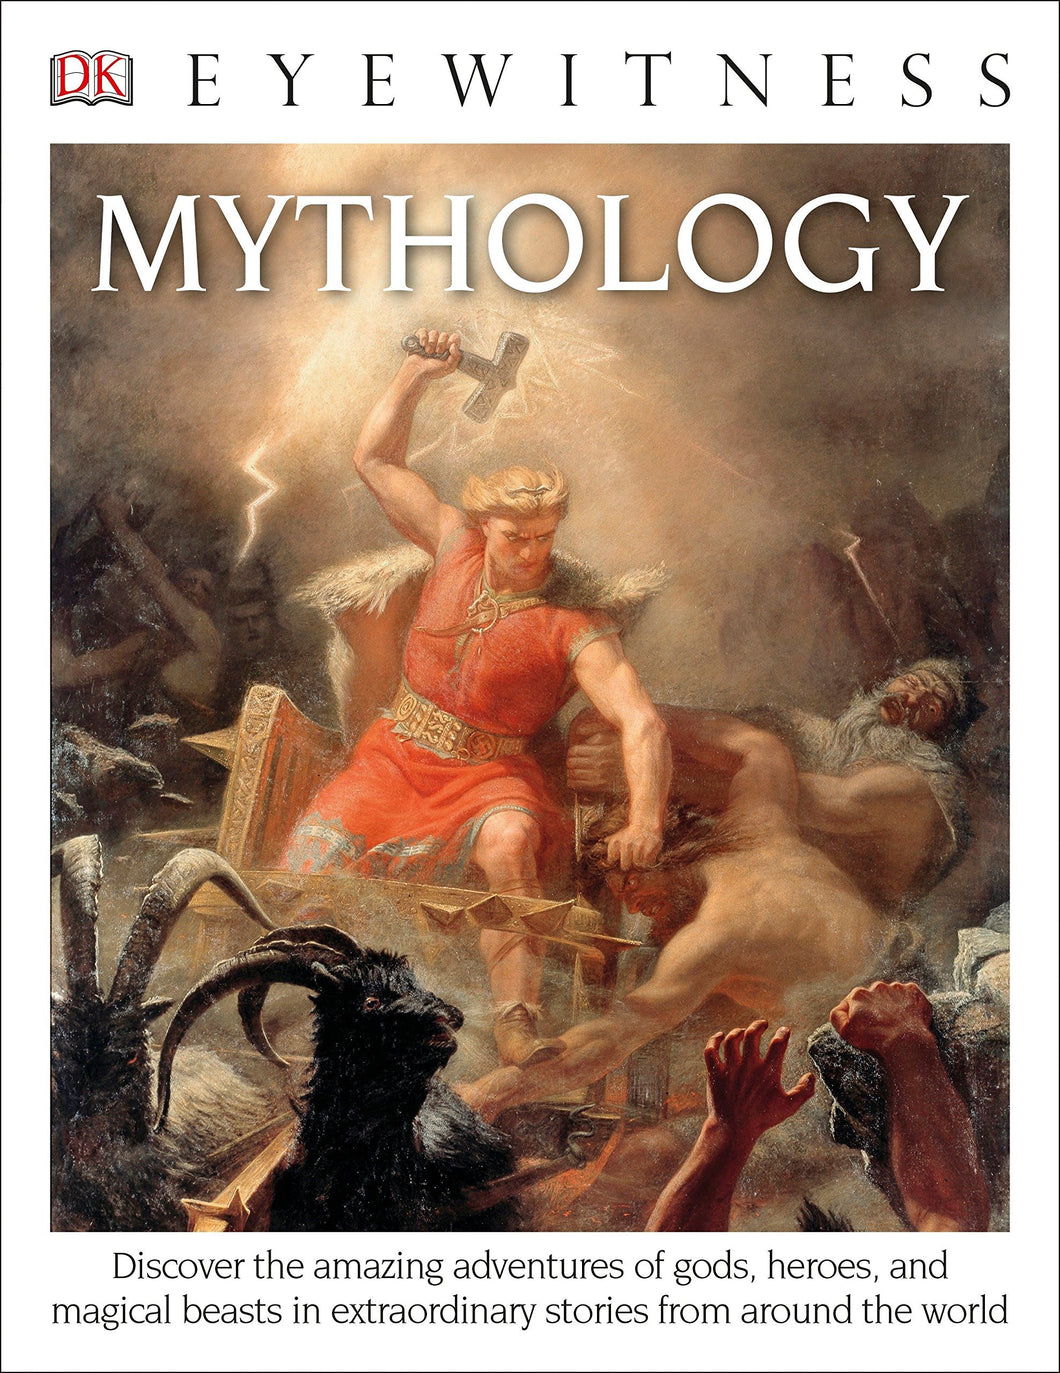 DK Eyewitness Books: Mythology: Discover the Amazing Adventures of Gods, Heroes, and Magical Beasts - ONLINE SCHOOL BOOK FAIRS 